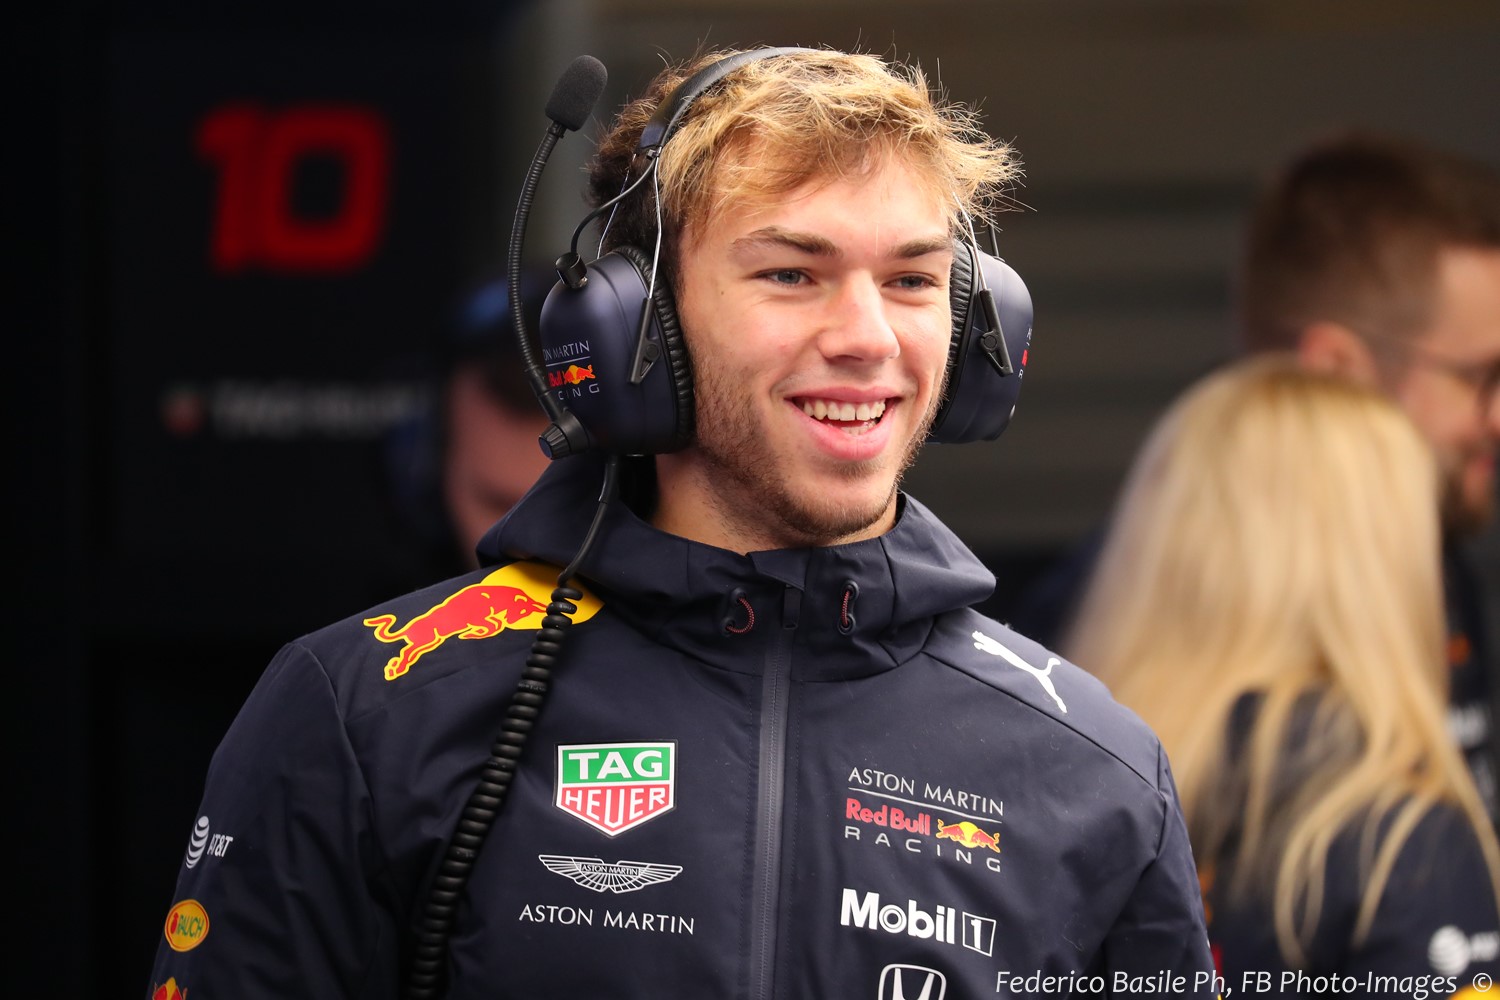 Speculation now centers on which series Gasly will drive in next year